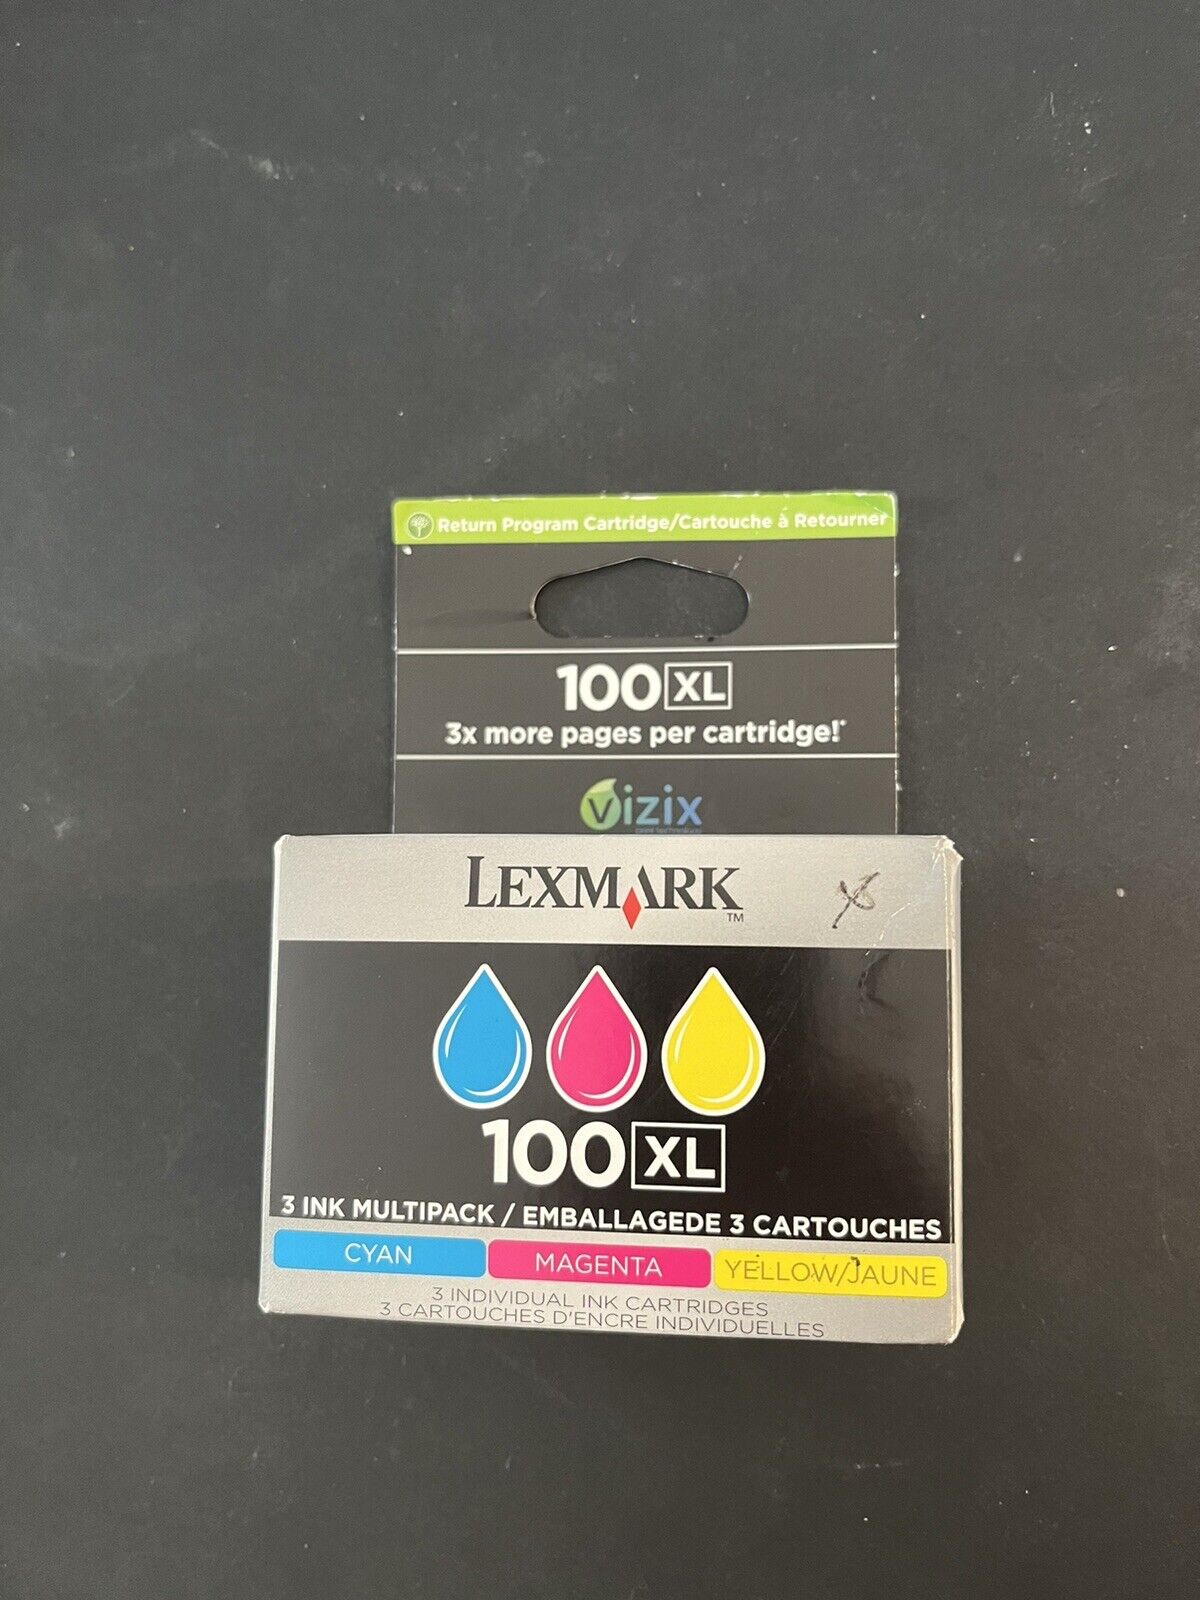 LEXMARK 100XL 3 Ink Multipack 3 Color Cartridges Cyan Magenta Yellow NEW, SEALED